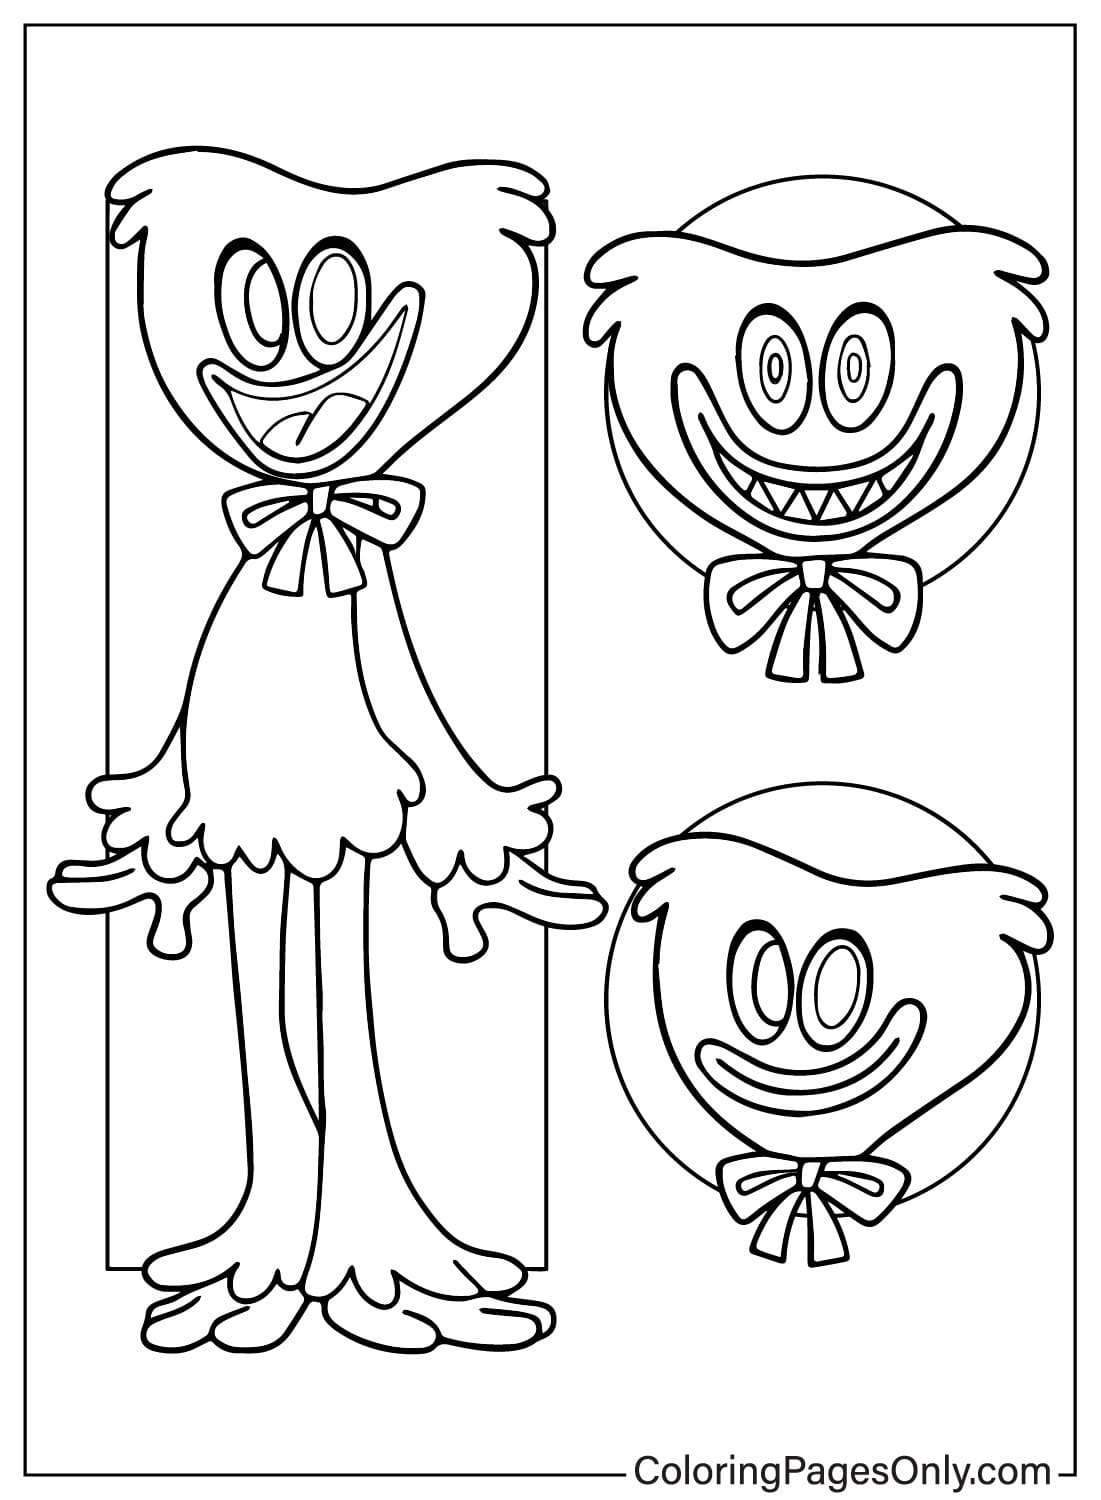 Coloriage Huggy Wuggy à imprimer de Huggy Wuggy